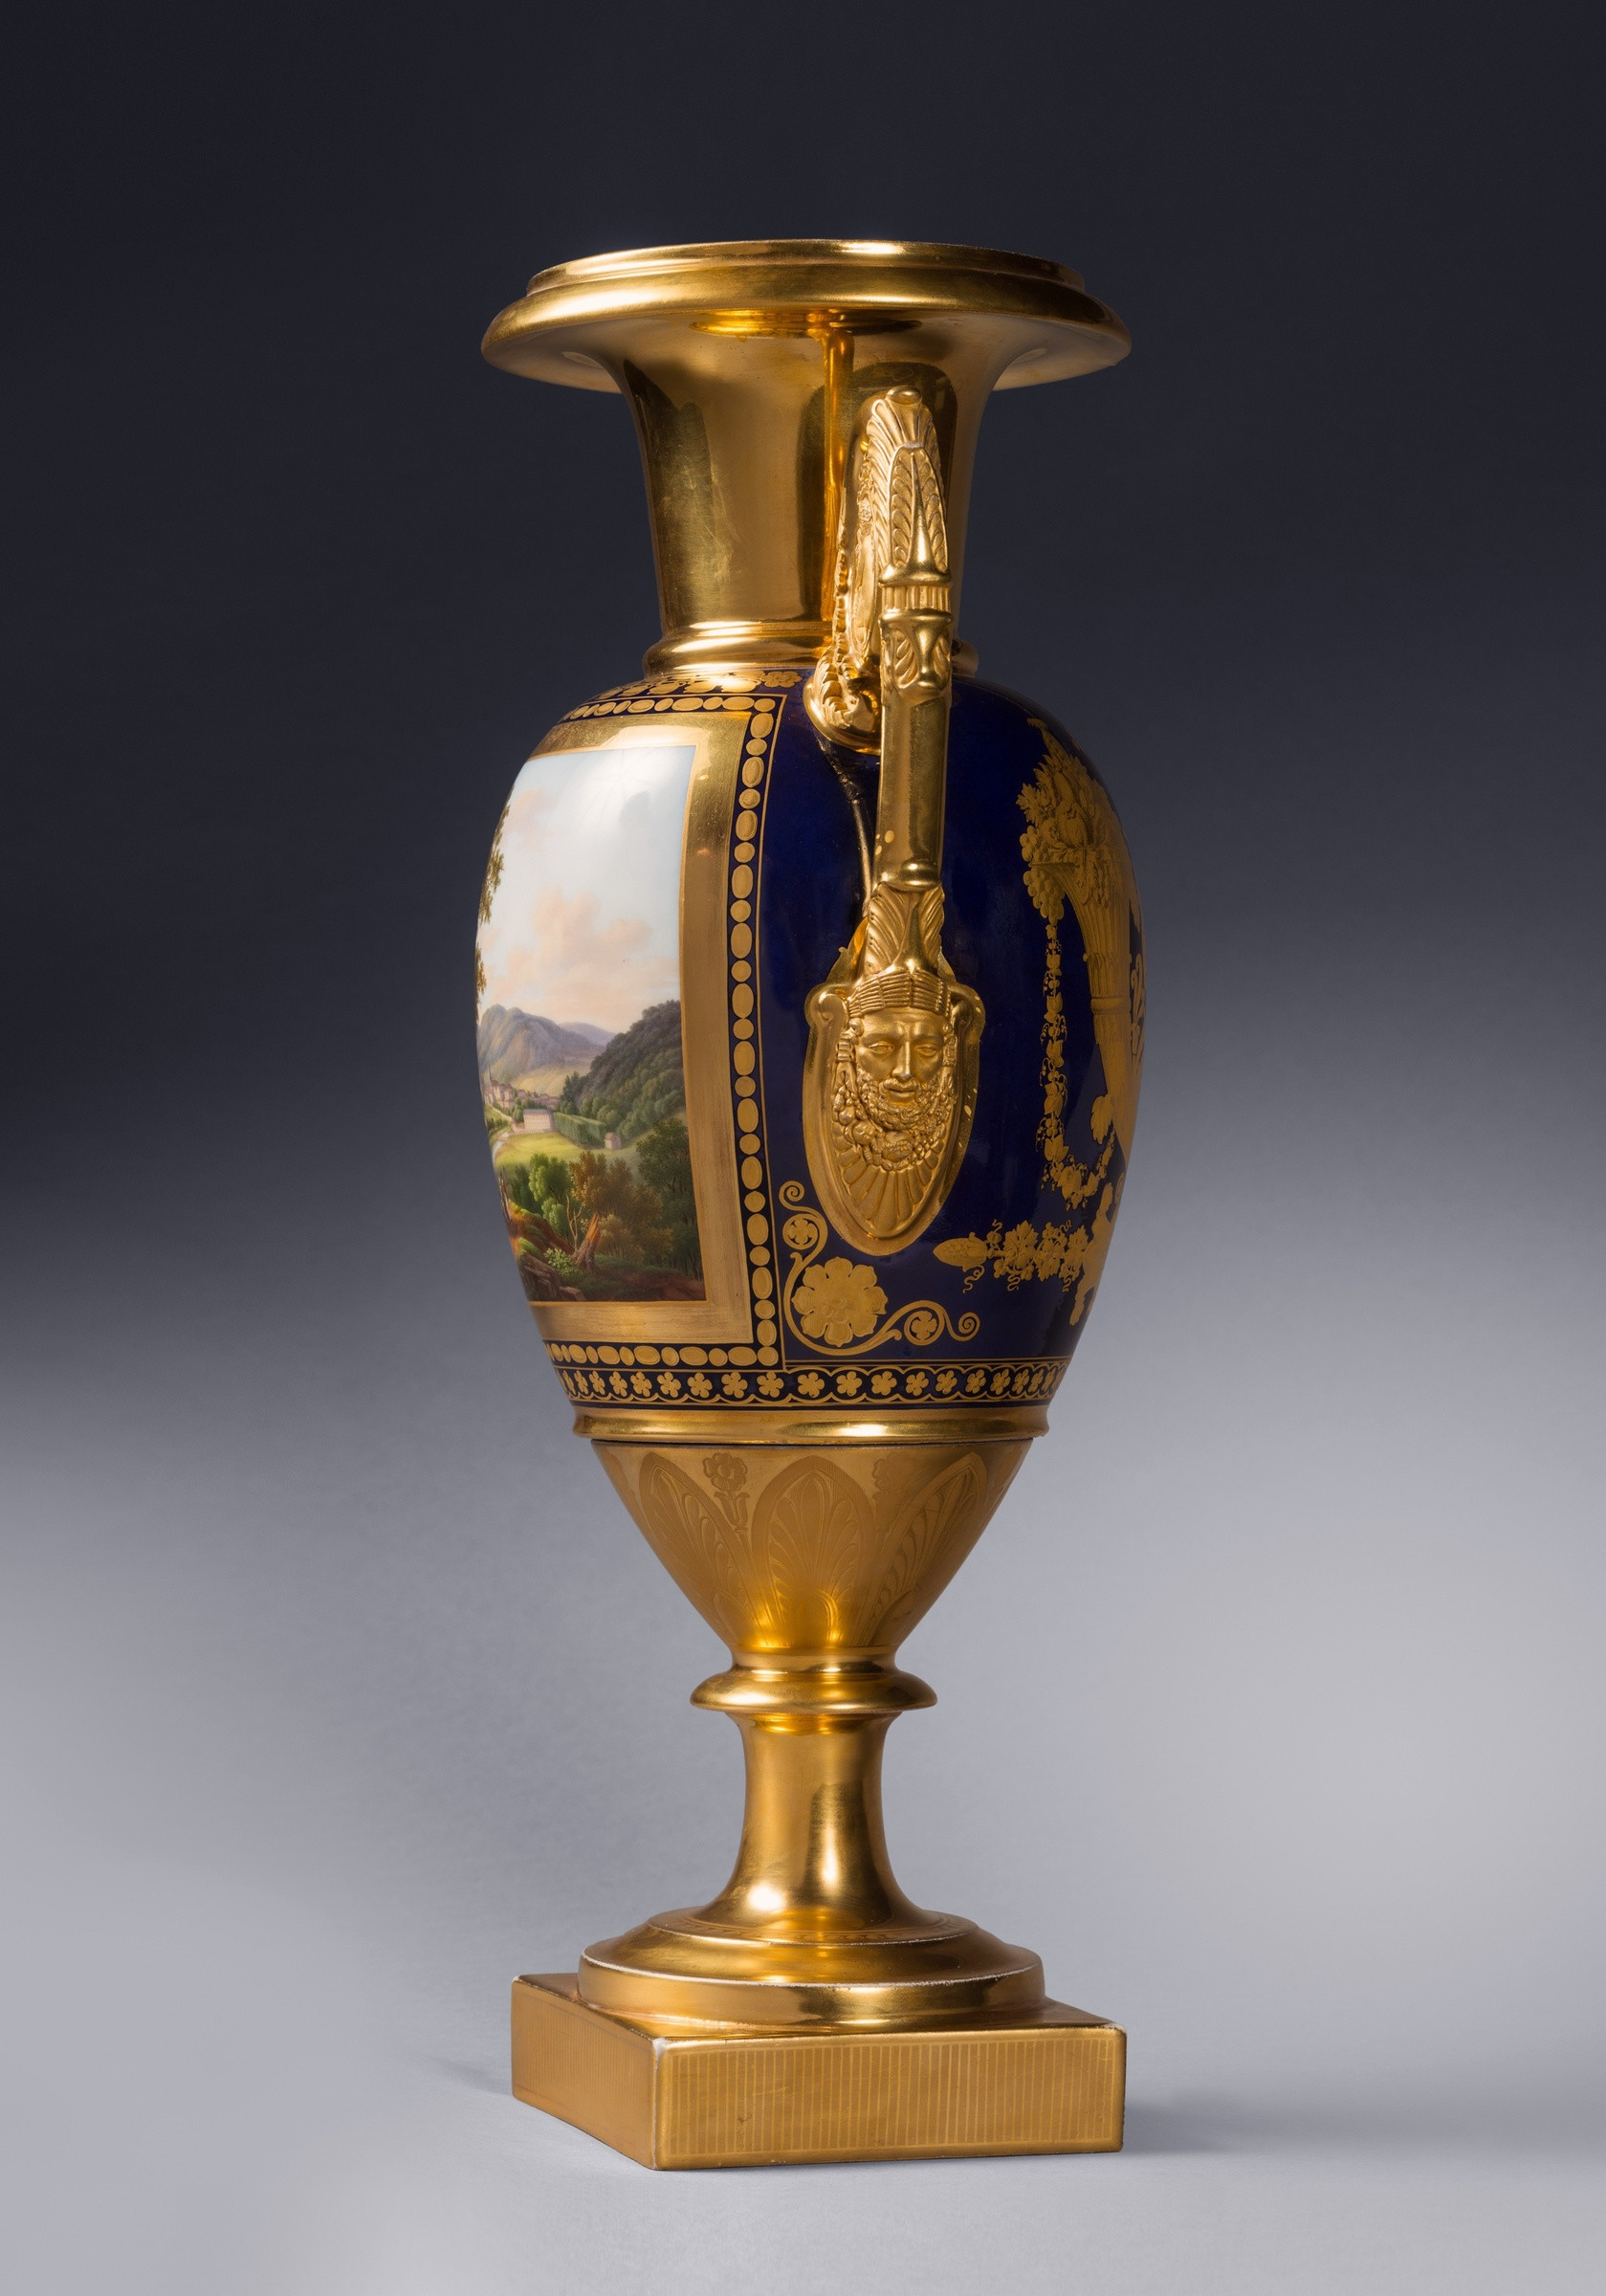 21 attractive Tall Thin Gold Vase 2024 free download tall thin gold vase of nast frac2a8res manufactory attributed to a pair of restauration two intended for a pair of restauration two handled vases probably by nast frac2a8res manufactory